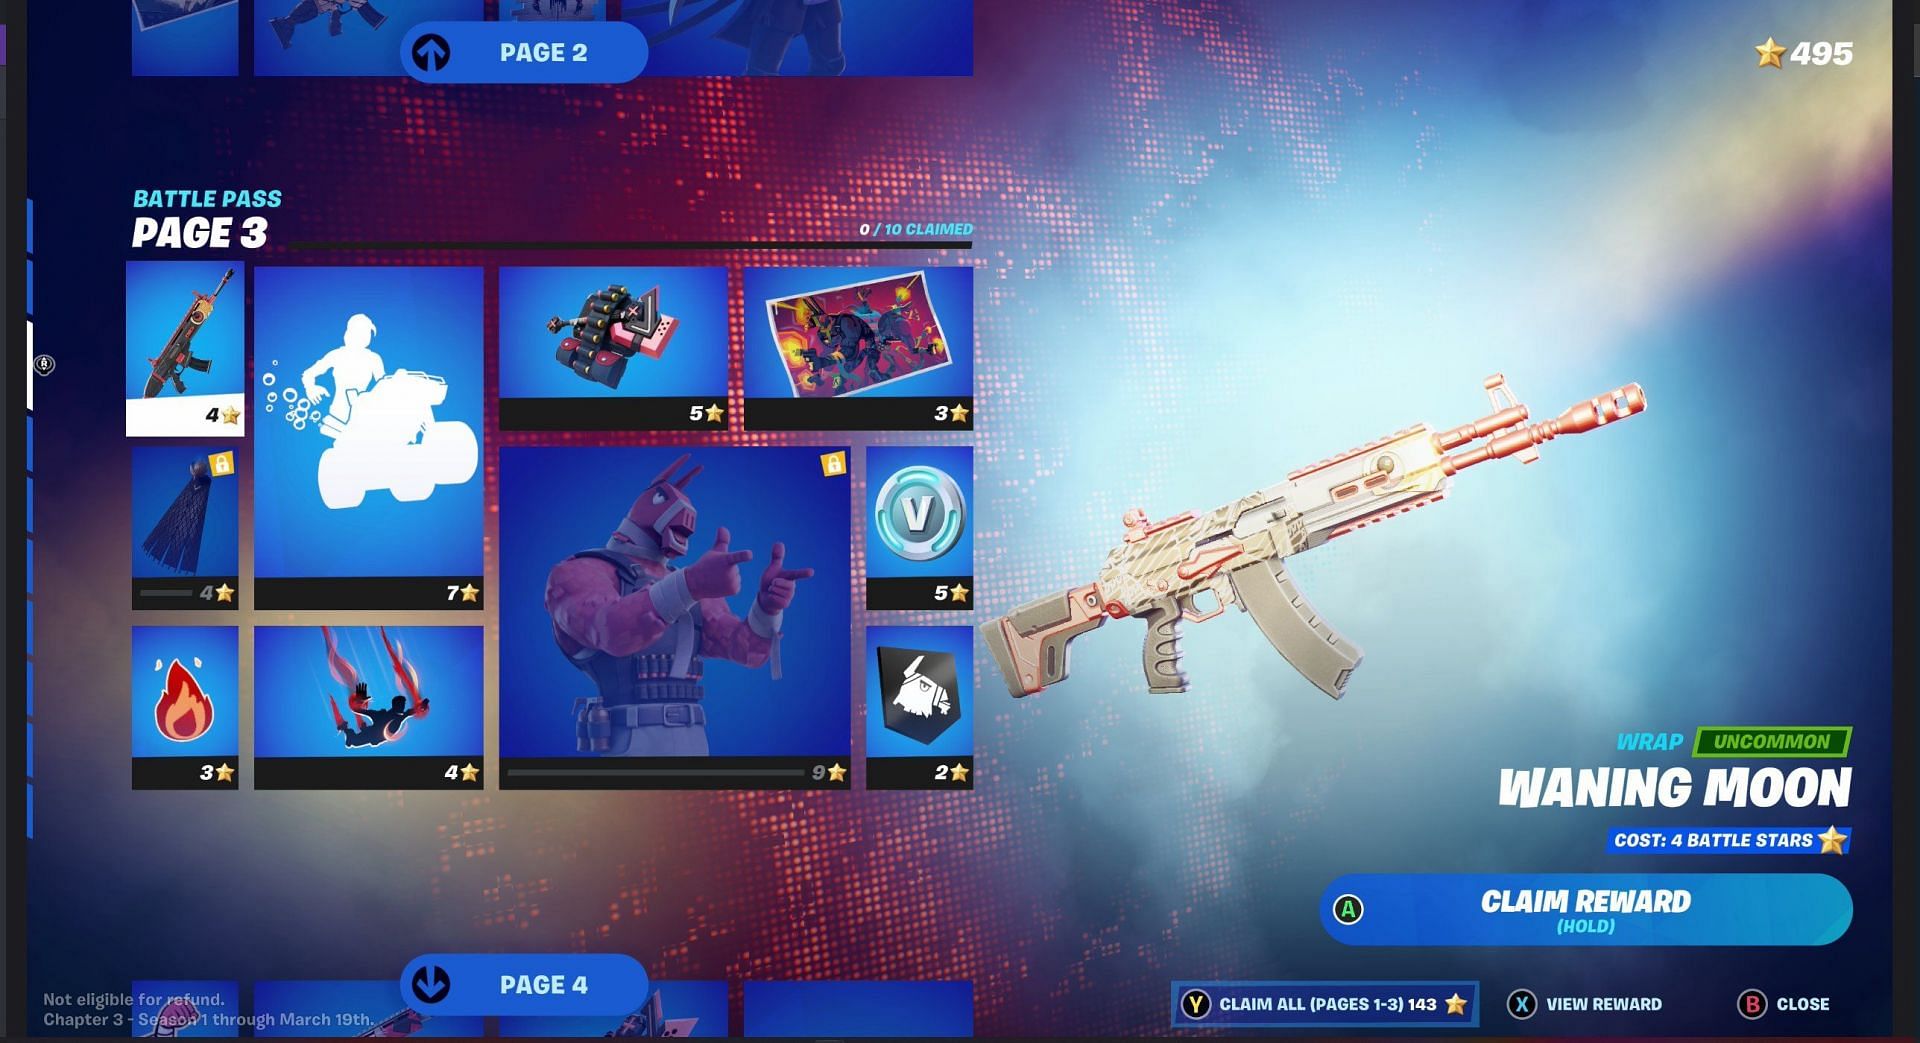 Page 3 of the Battle Pass (Image via Fortnite)